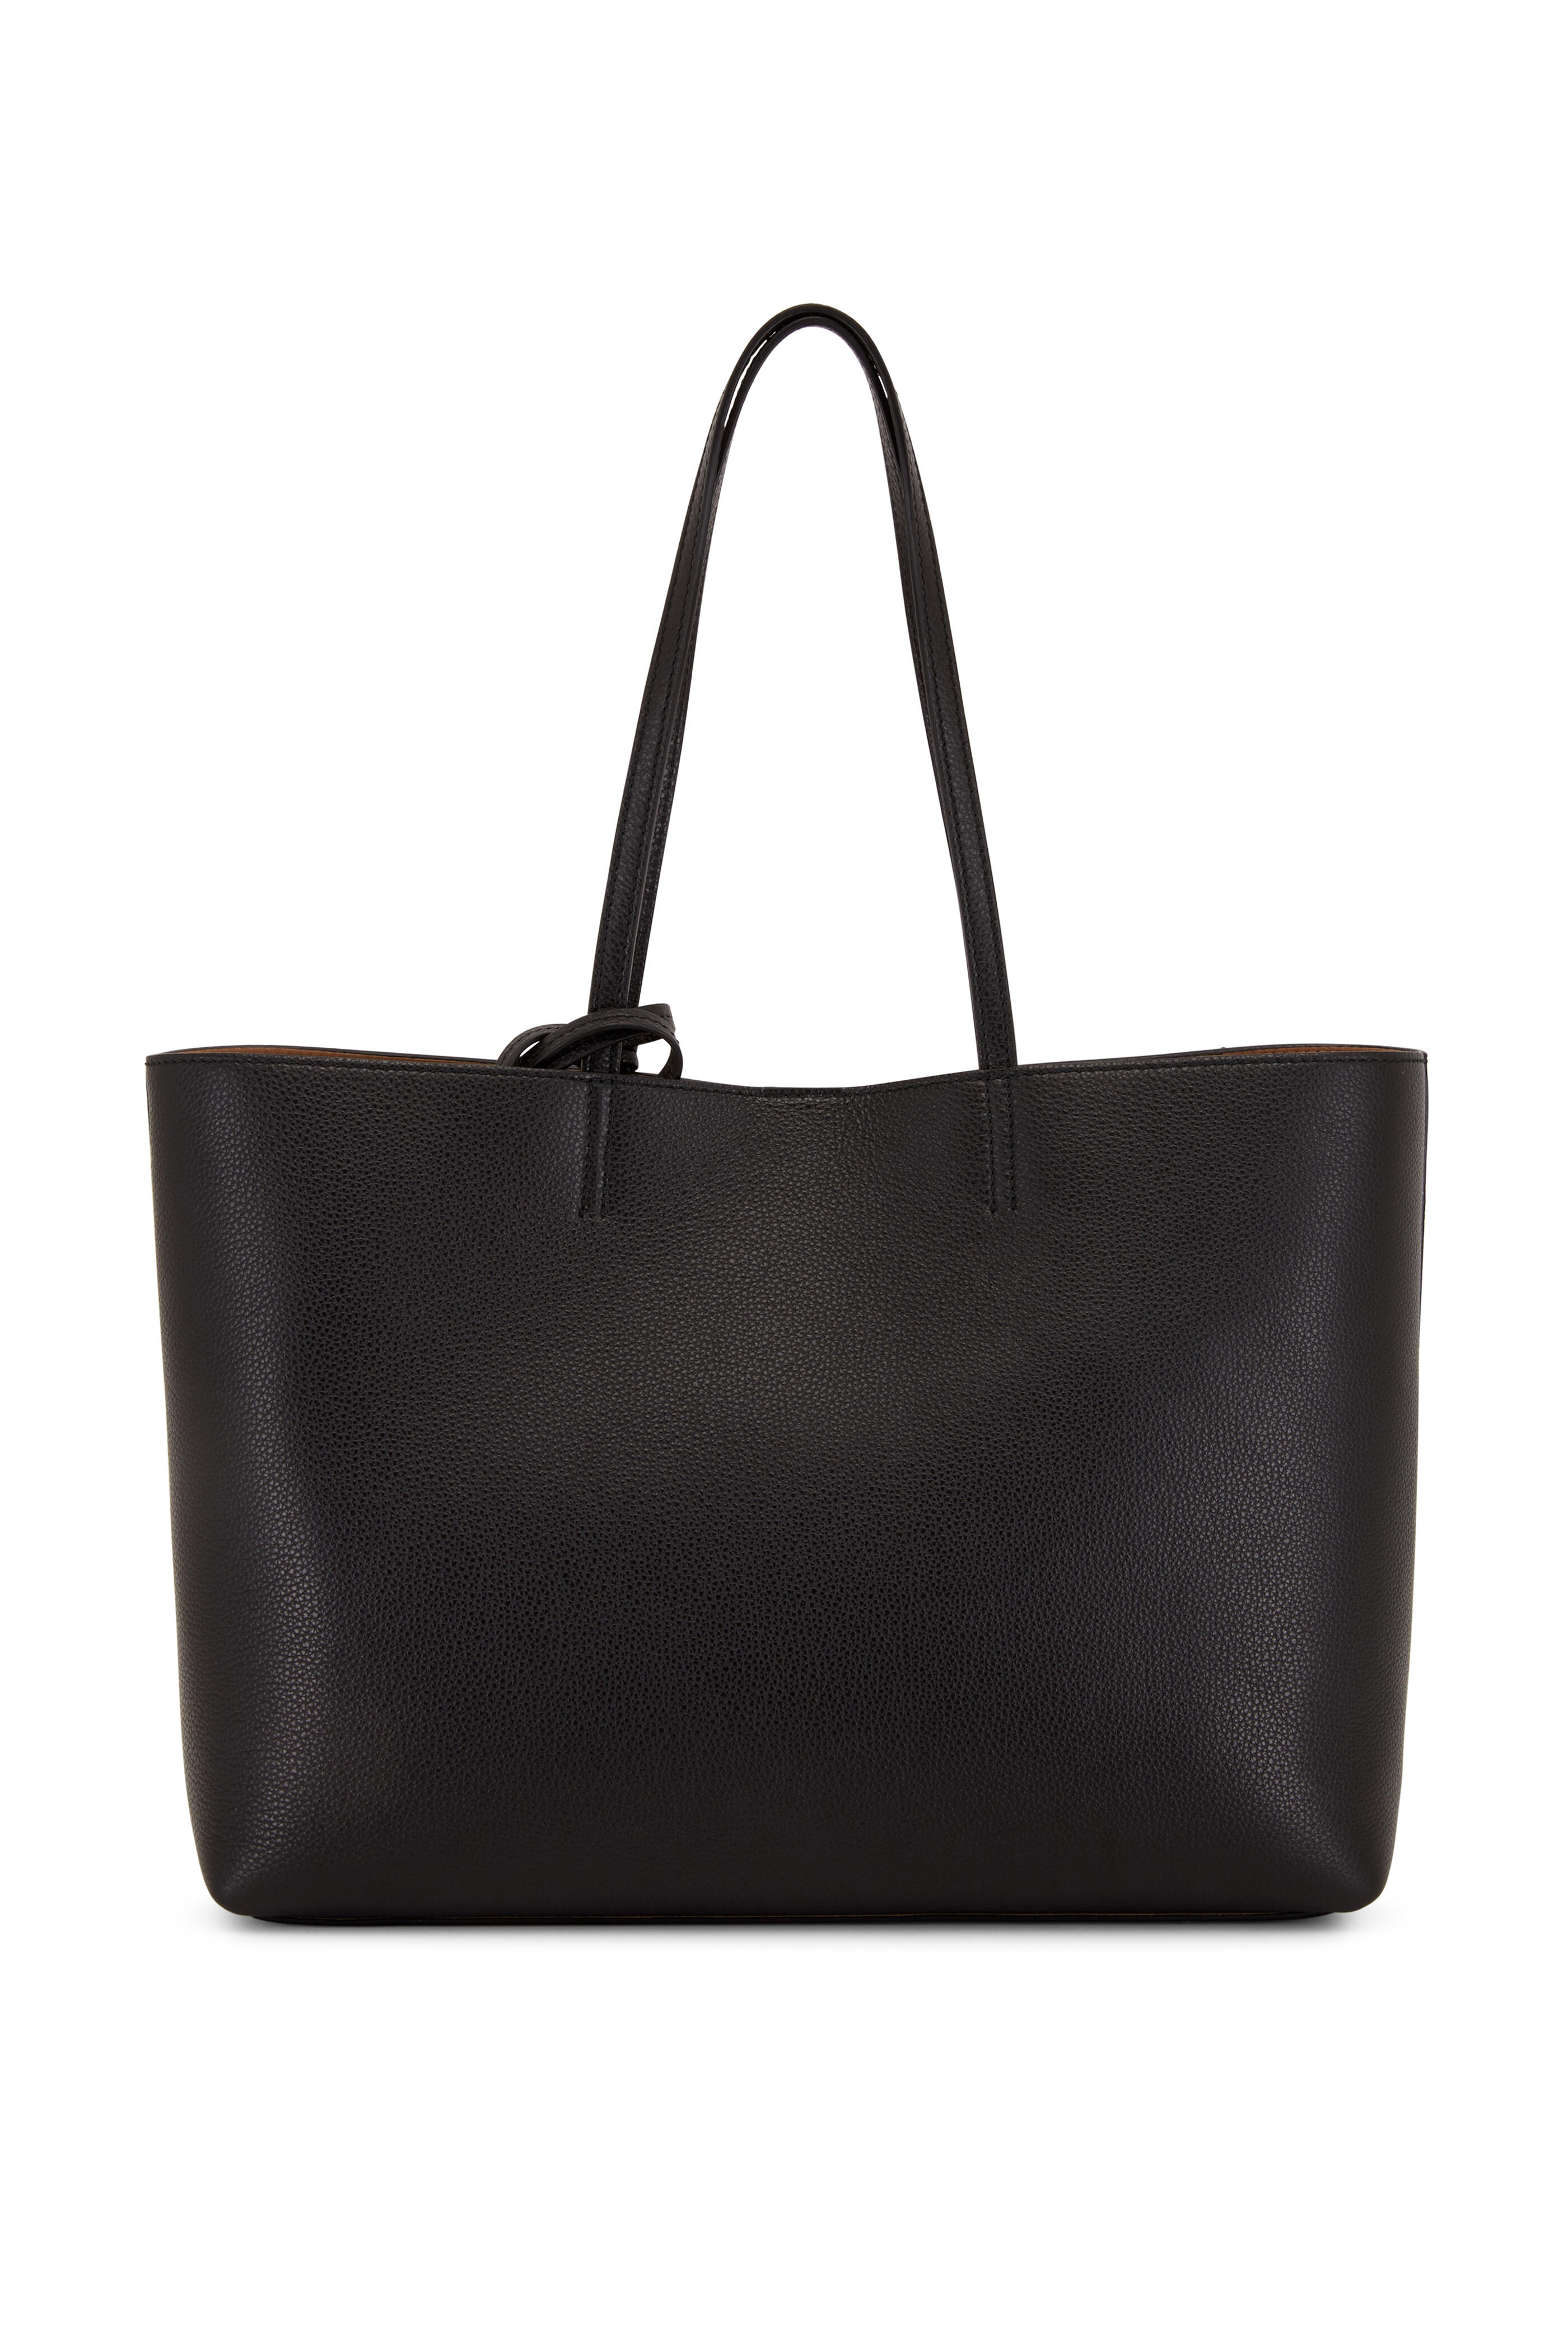 Jimmy Choo - Nine2Five Black Leather Tote | Mitchell Stores